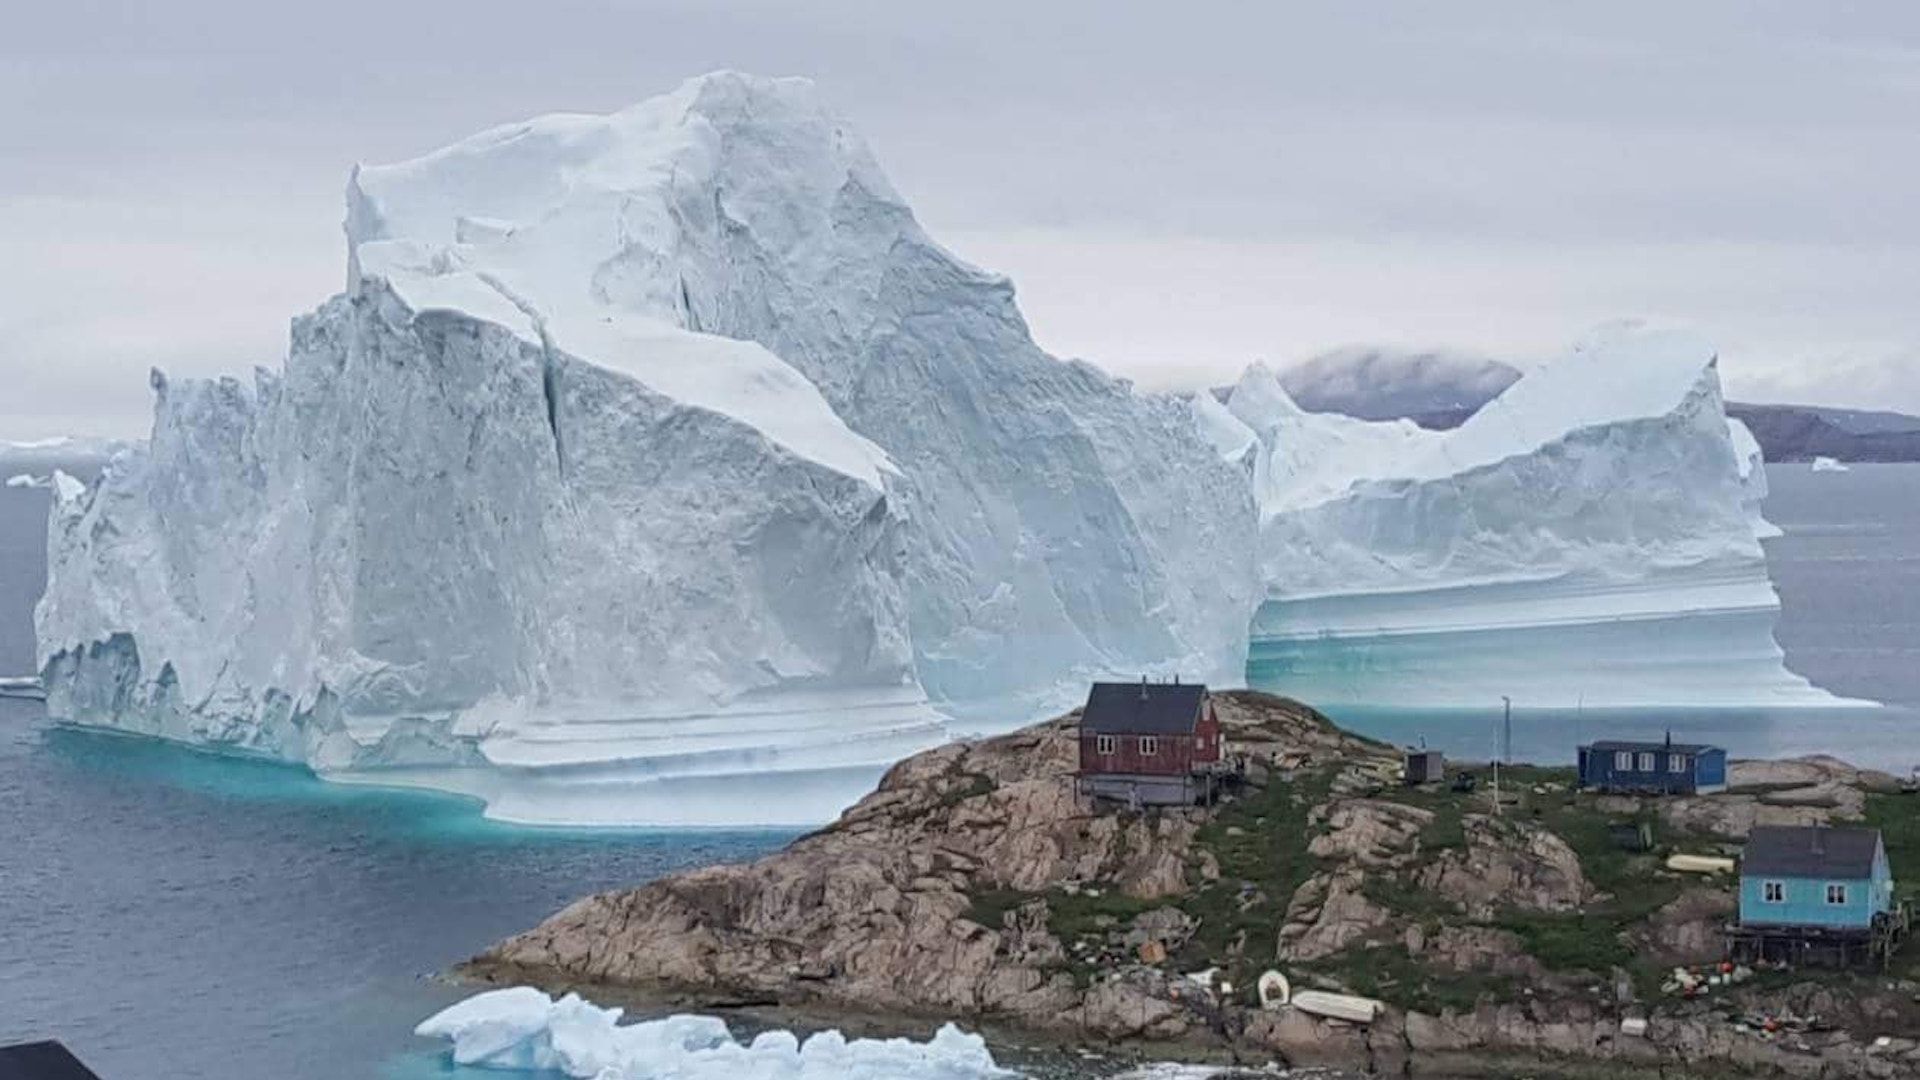 A picture taken on July 13, 2018 shows an iceberg behind houses and buildings after it grounded outside the village of Innaarsuit, Greenland.